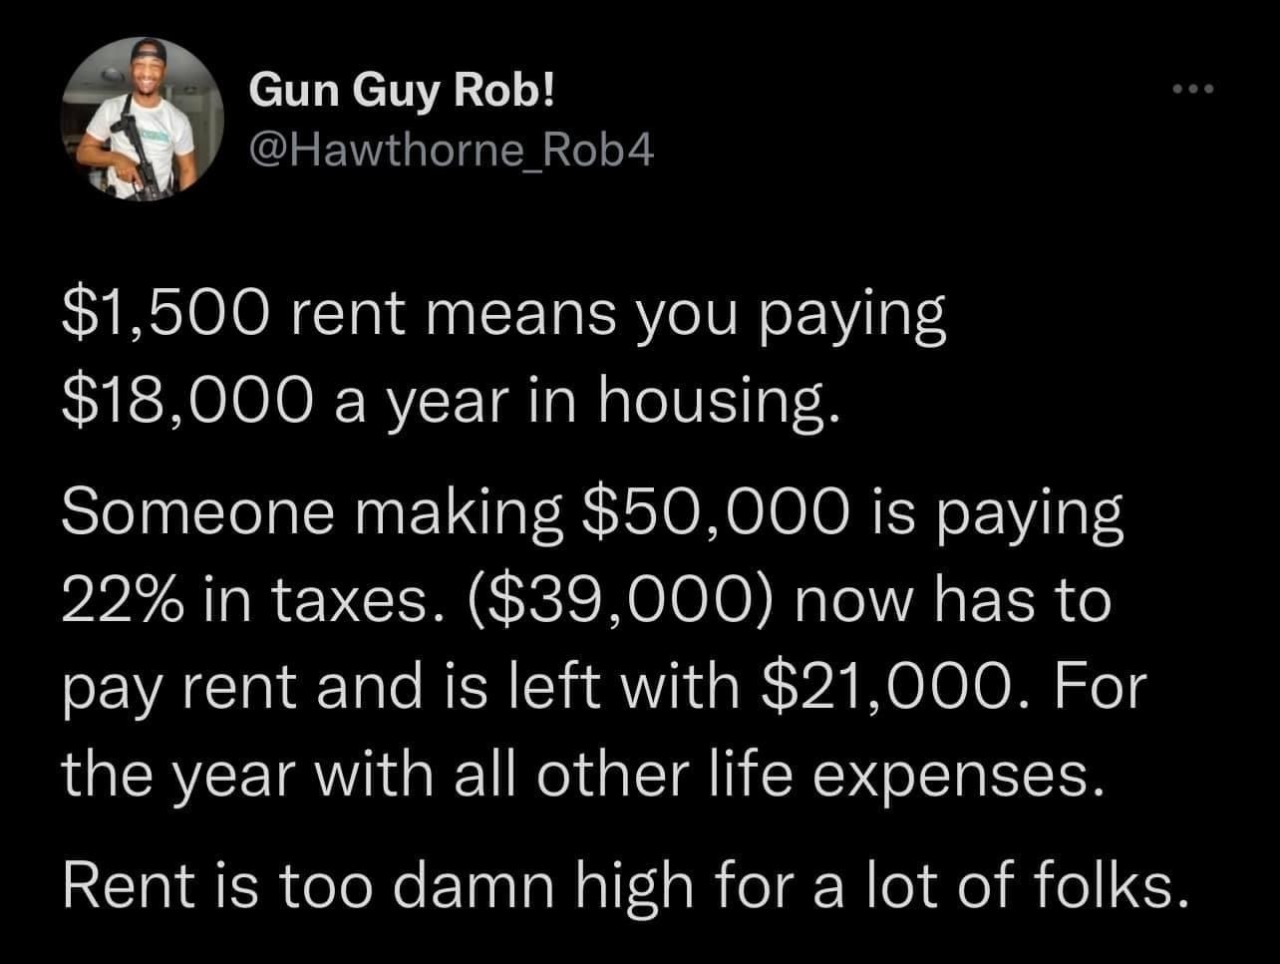 All due respect bruh, a tweet
isn’t going to change the rent. What are you doing in the real world to change policy & help progressive democrats? We can’t create change if folks like you won’t help organizations & new leaders, #fact. USAunify.org